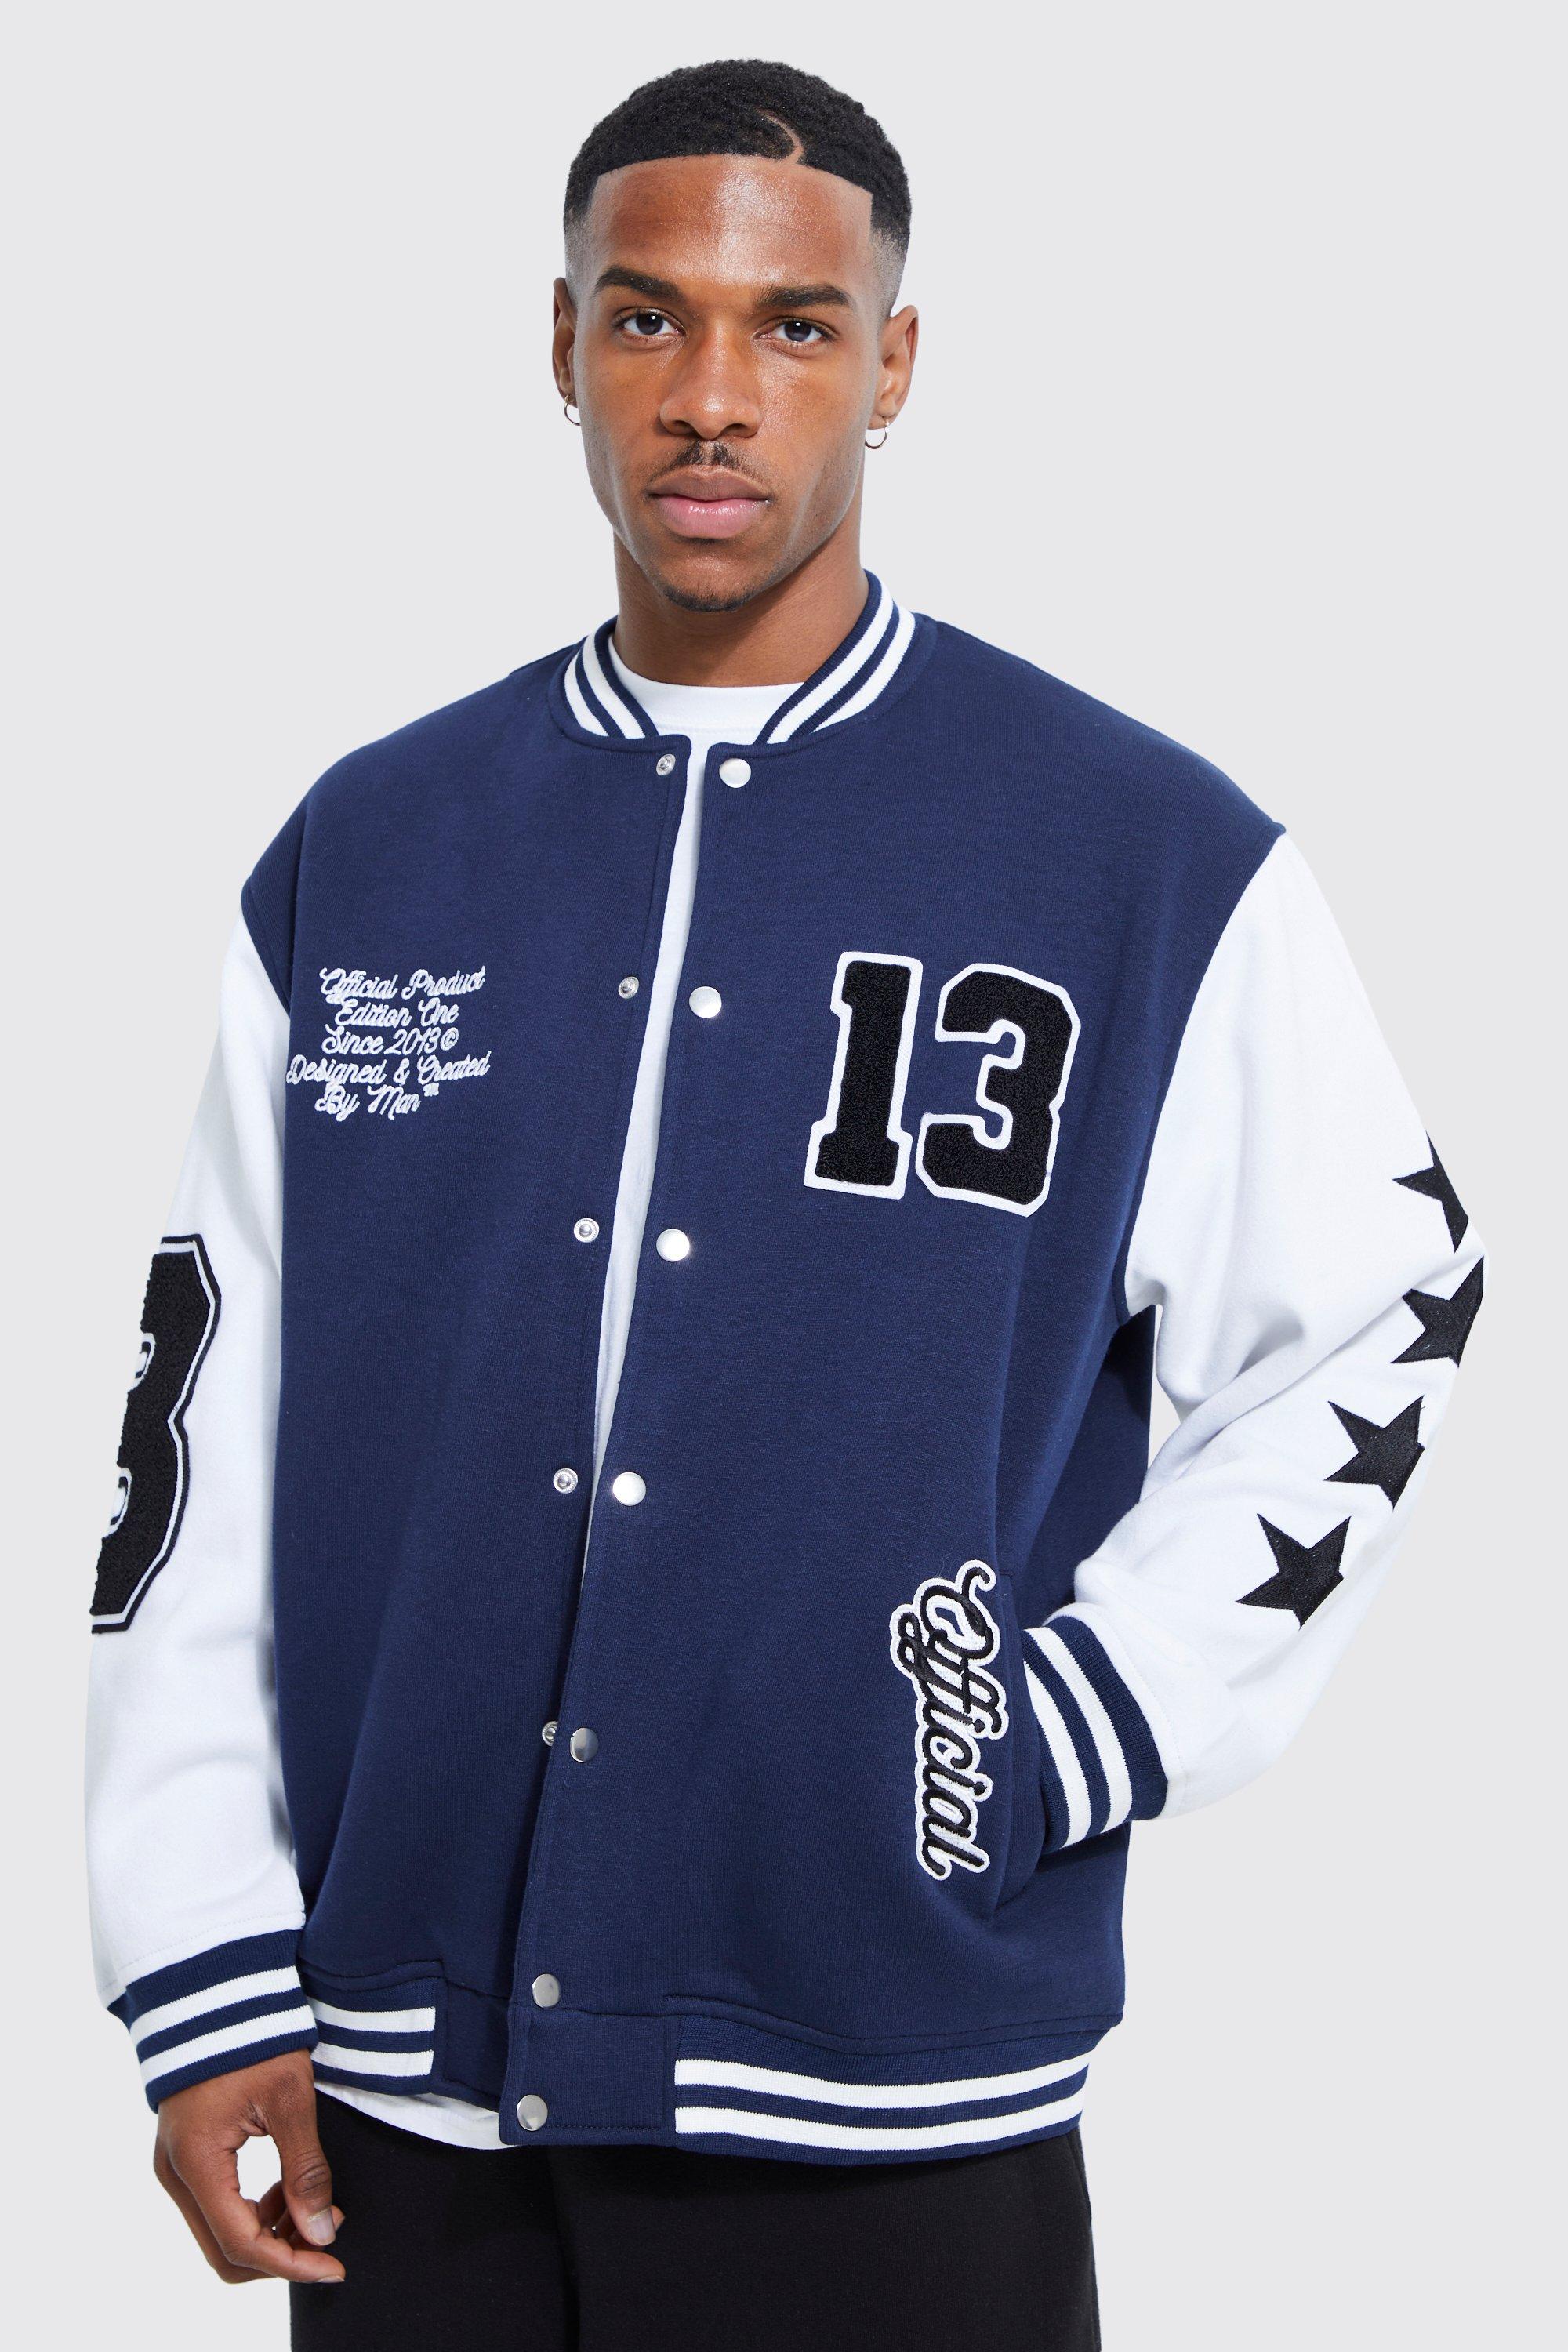 Members Only NY Blue, Green & Red Letterman Jacket